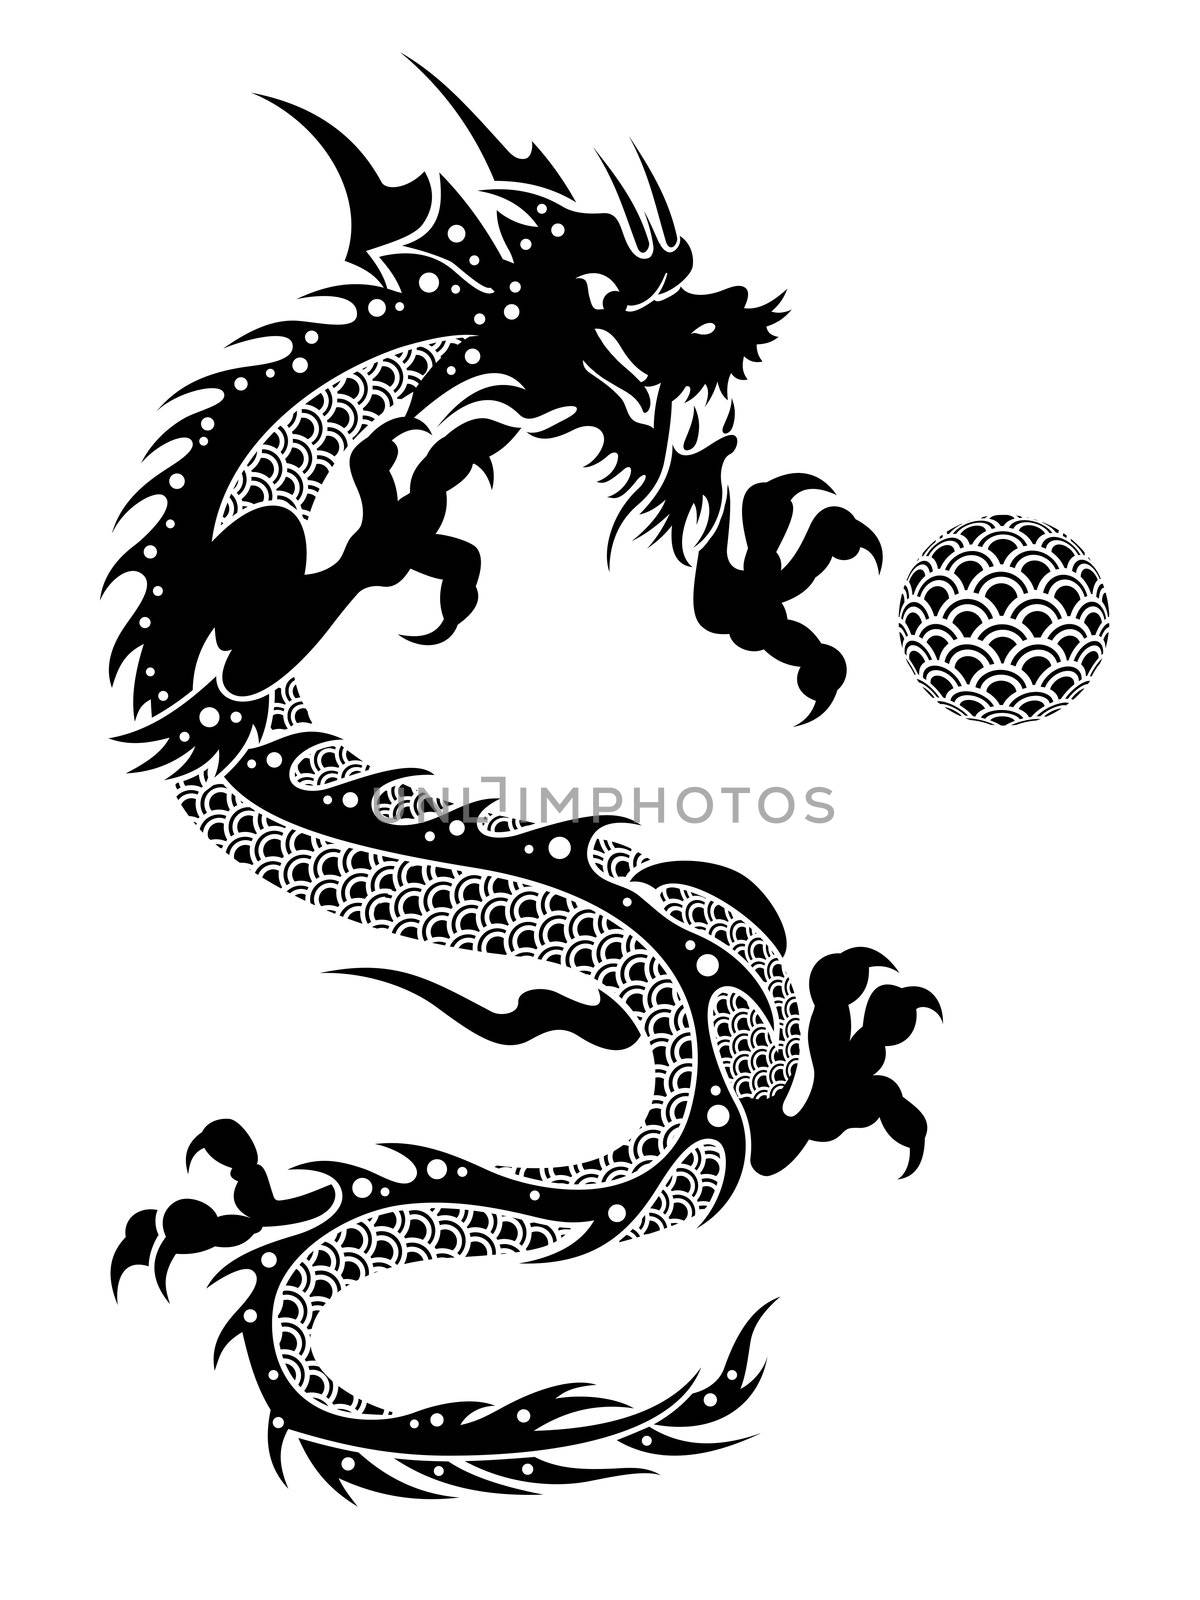 2012 Flying Chinese New Year of the Dragon with Ball and Fish Scales on White Background Illustration